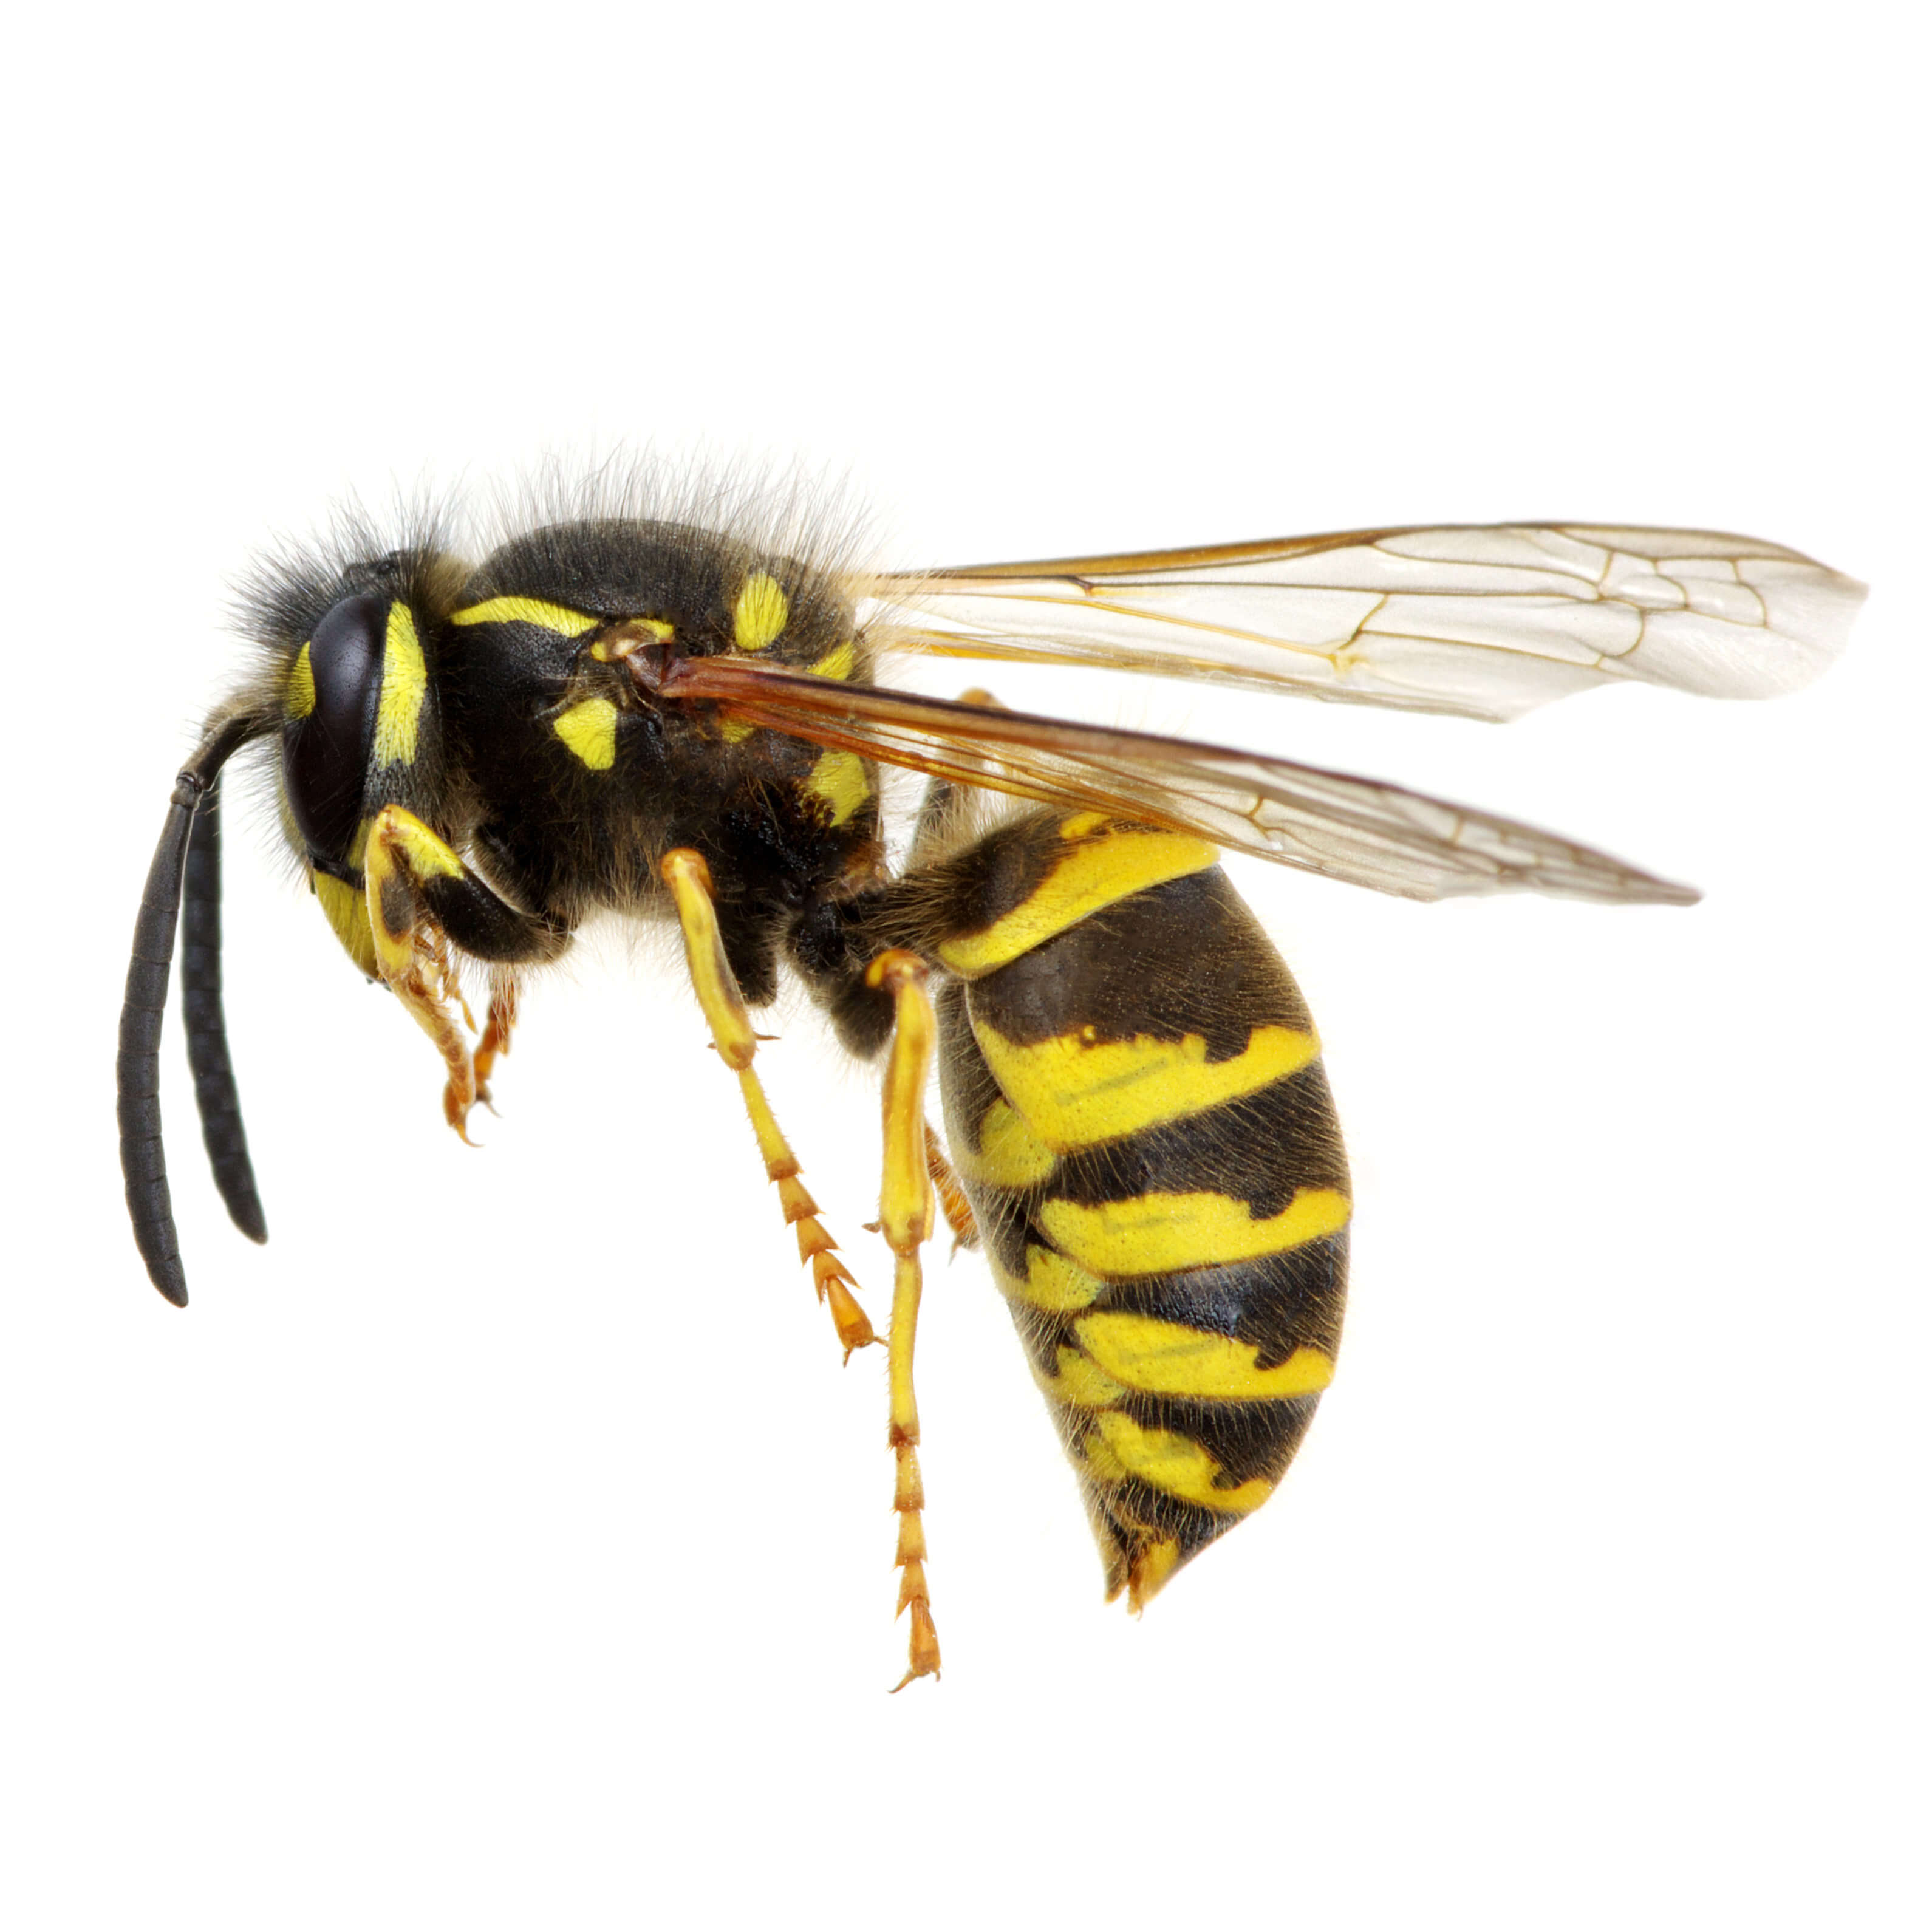 Wasps | Facts & Identification, Control & Prevention